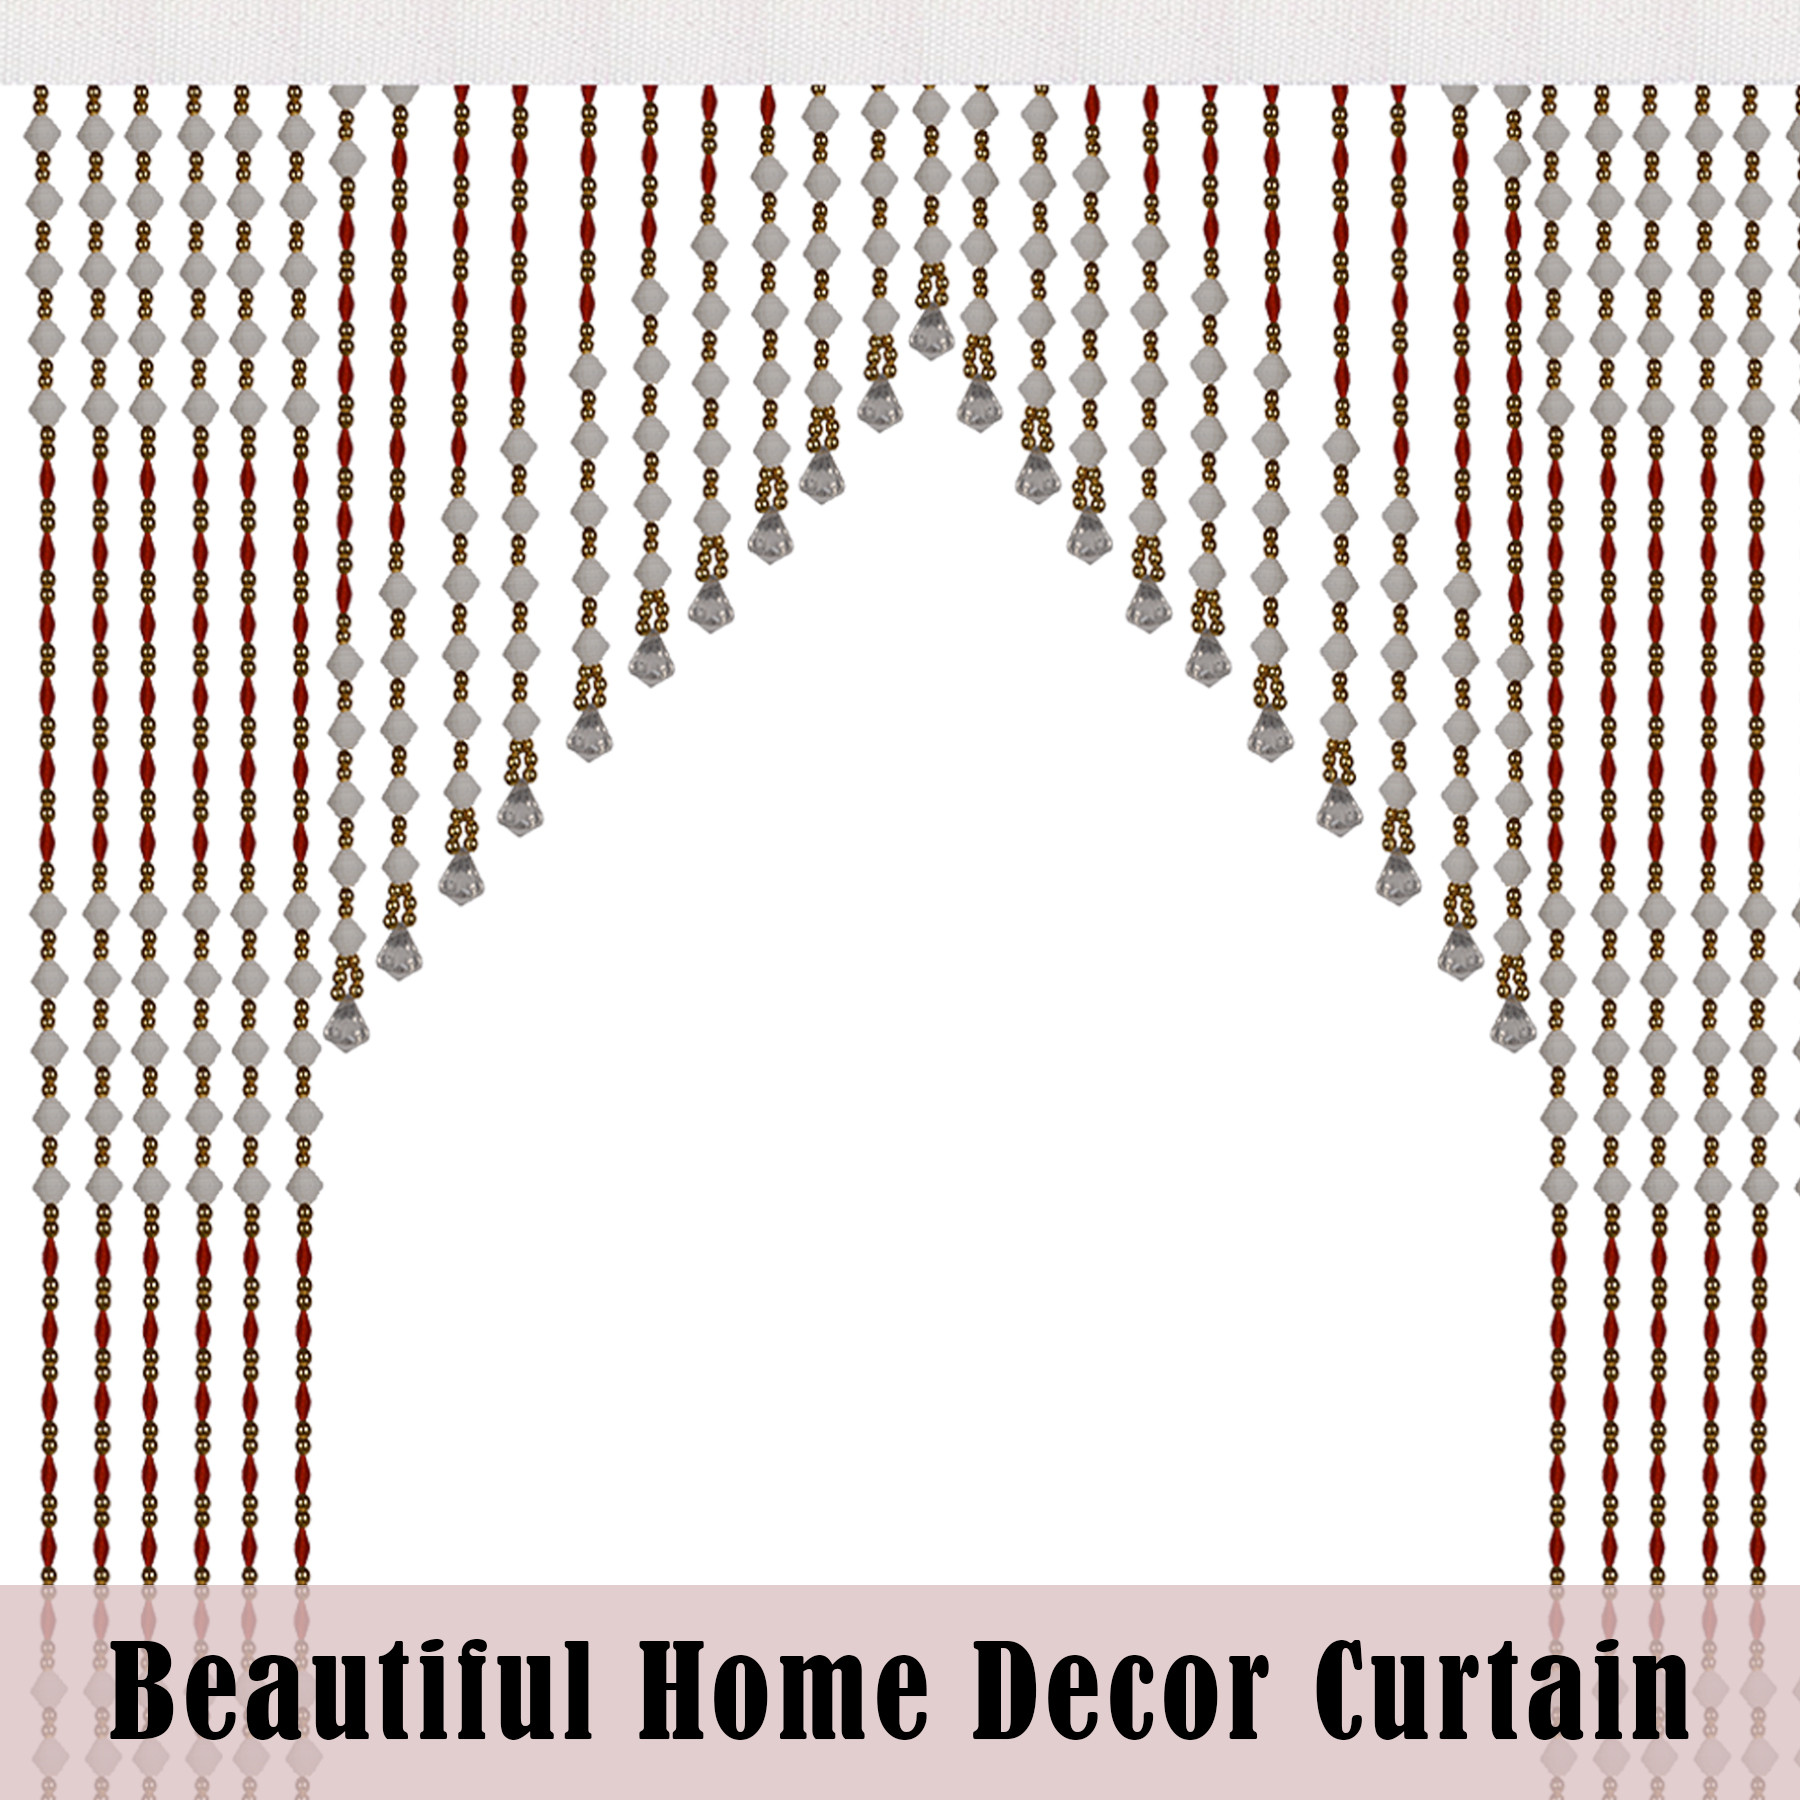 Kuber Industries String Curtain | Fancy Sparkling Door Curtains for Home Décor | Pooja Room String Curtains | String Beads Sheer Curtains | Angura Temple Curtain | 4x7 Feet | White & Red